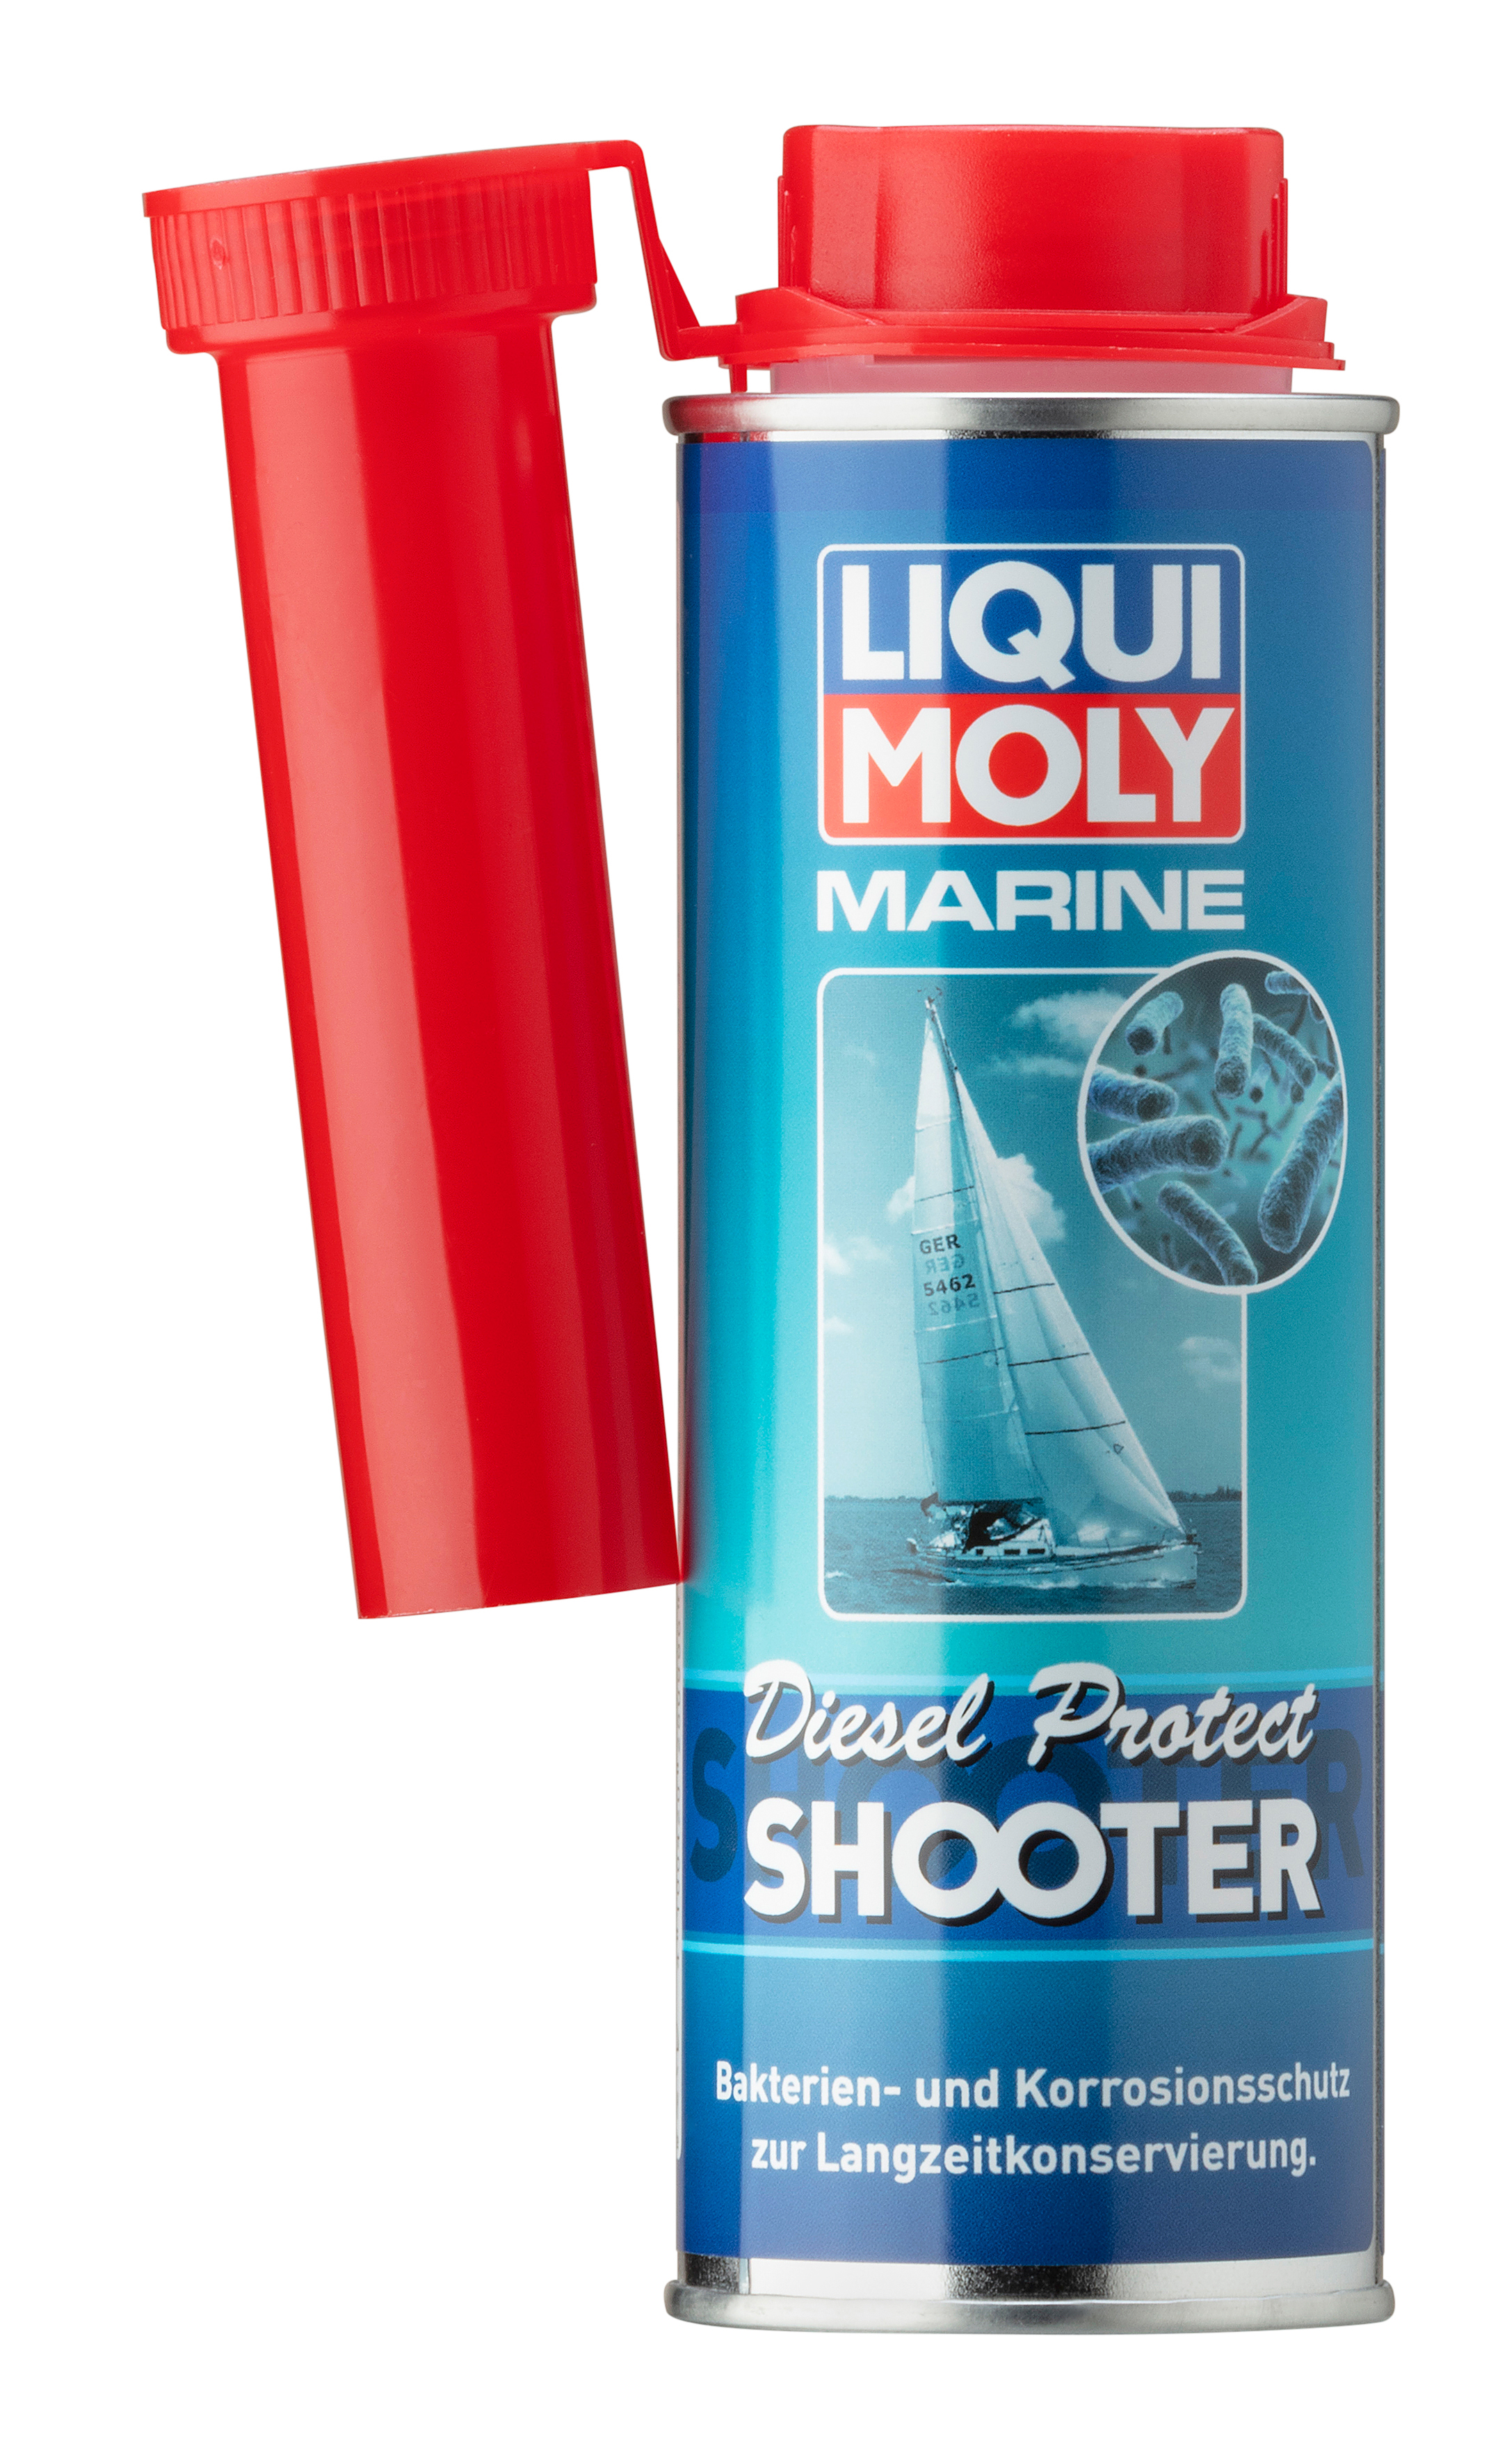 Liqui Moly Diesel Protect Shooter